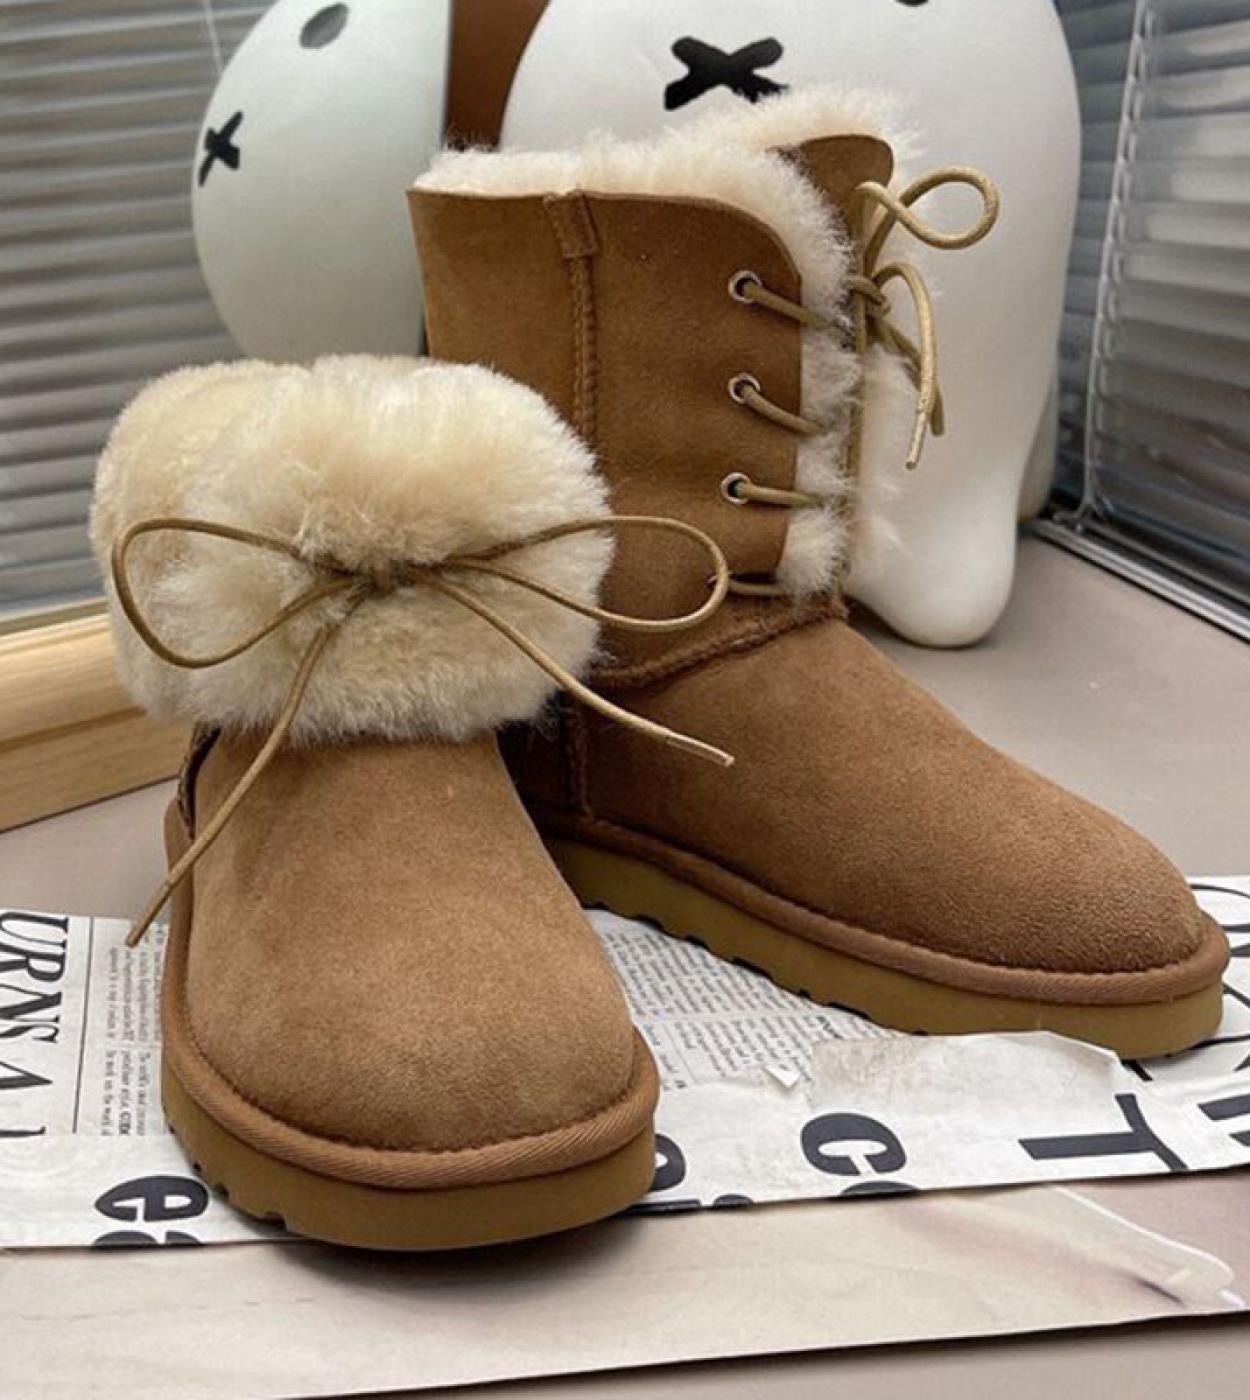 2023 New Winter Snow Boots For Women Fashion Bow Tie Lace Up Mid Calf Boots Ladies Platform Cotton Boots Warm Plush Wome